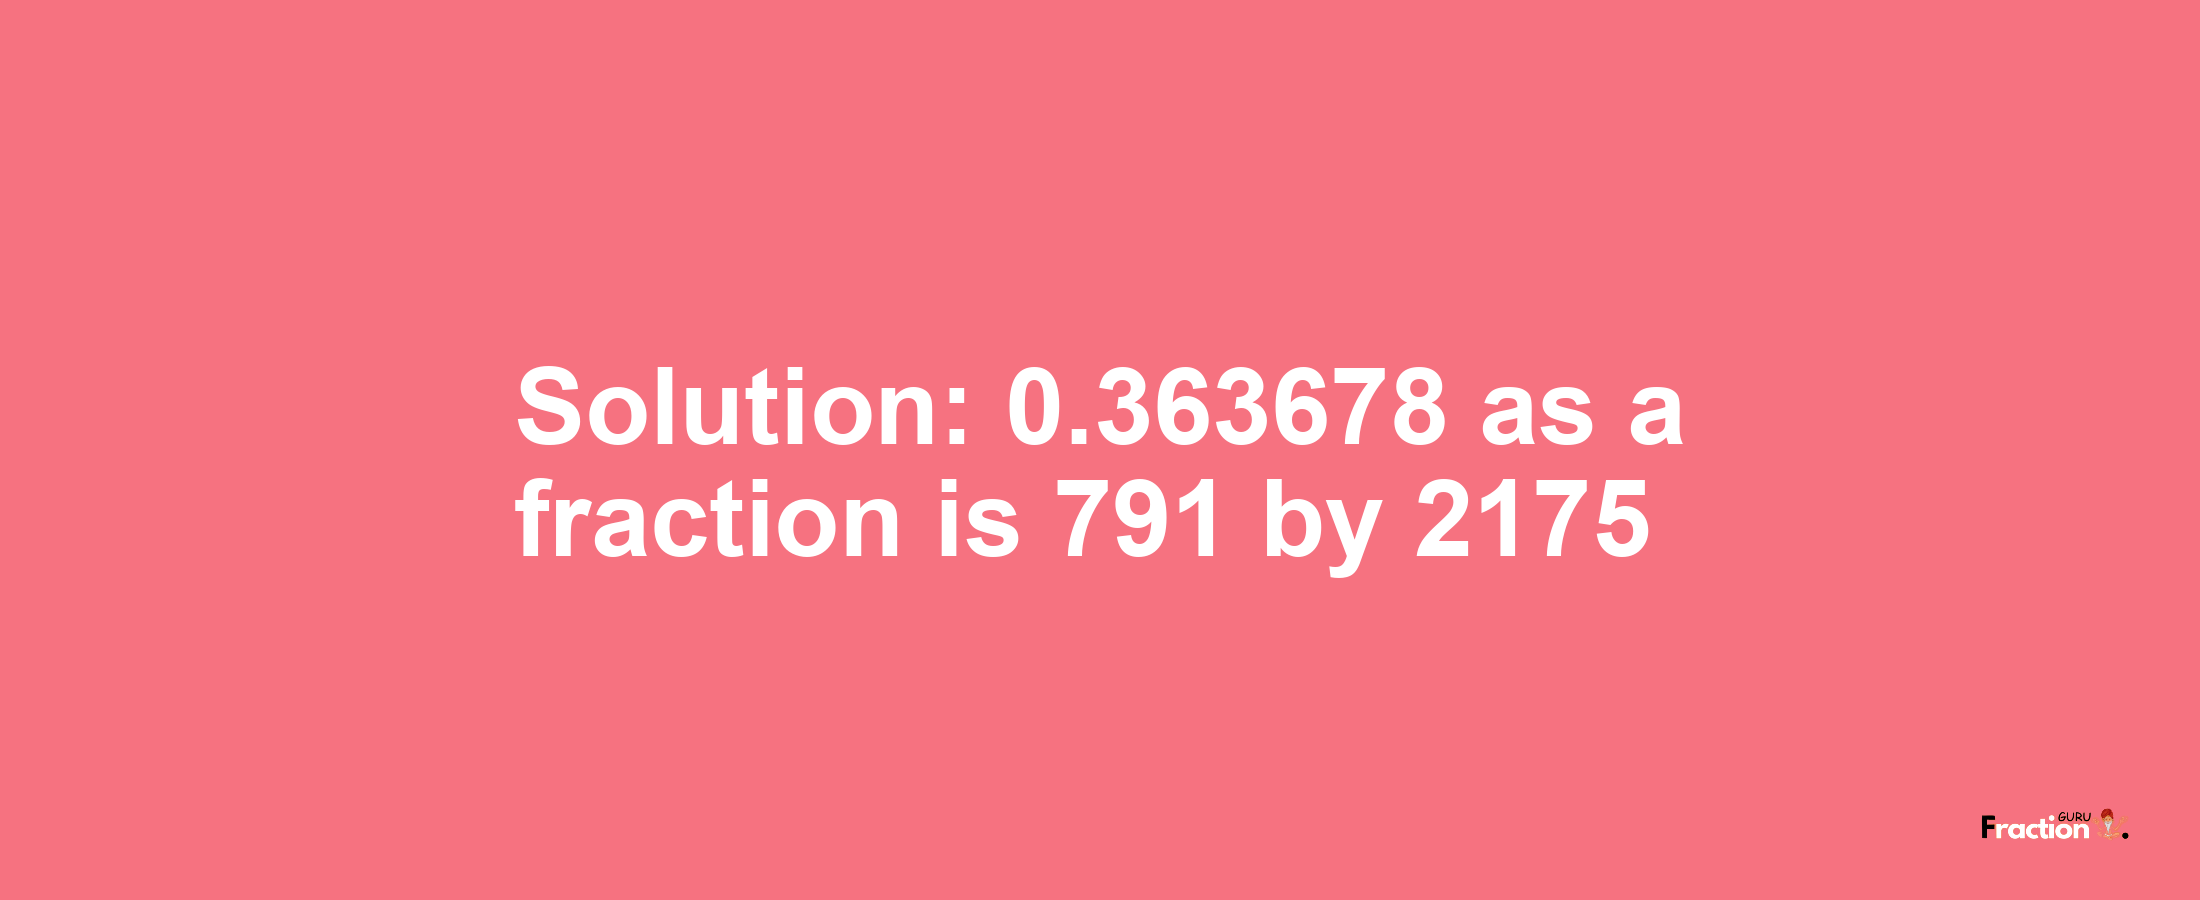 Solution:0.363678 as a fraction is 791/2175